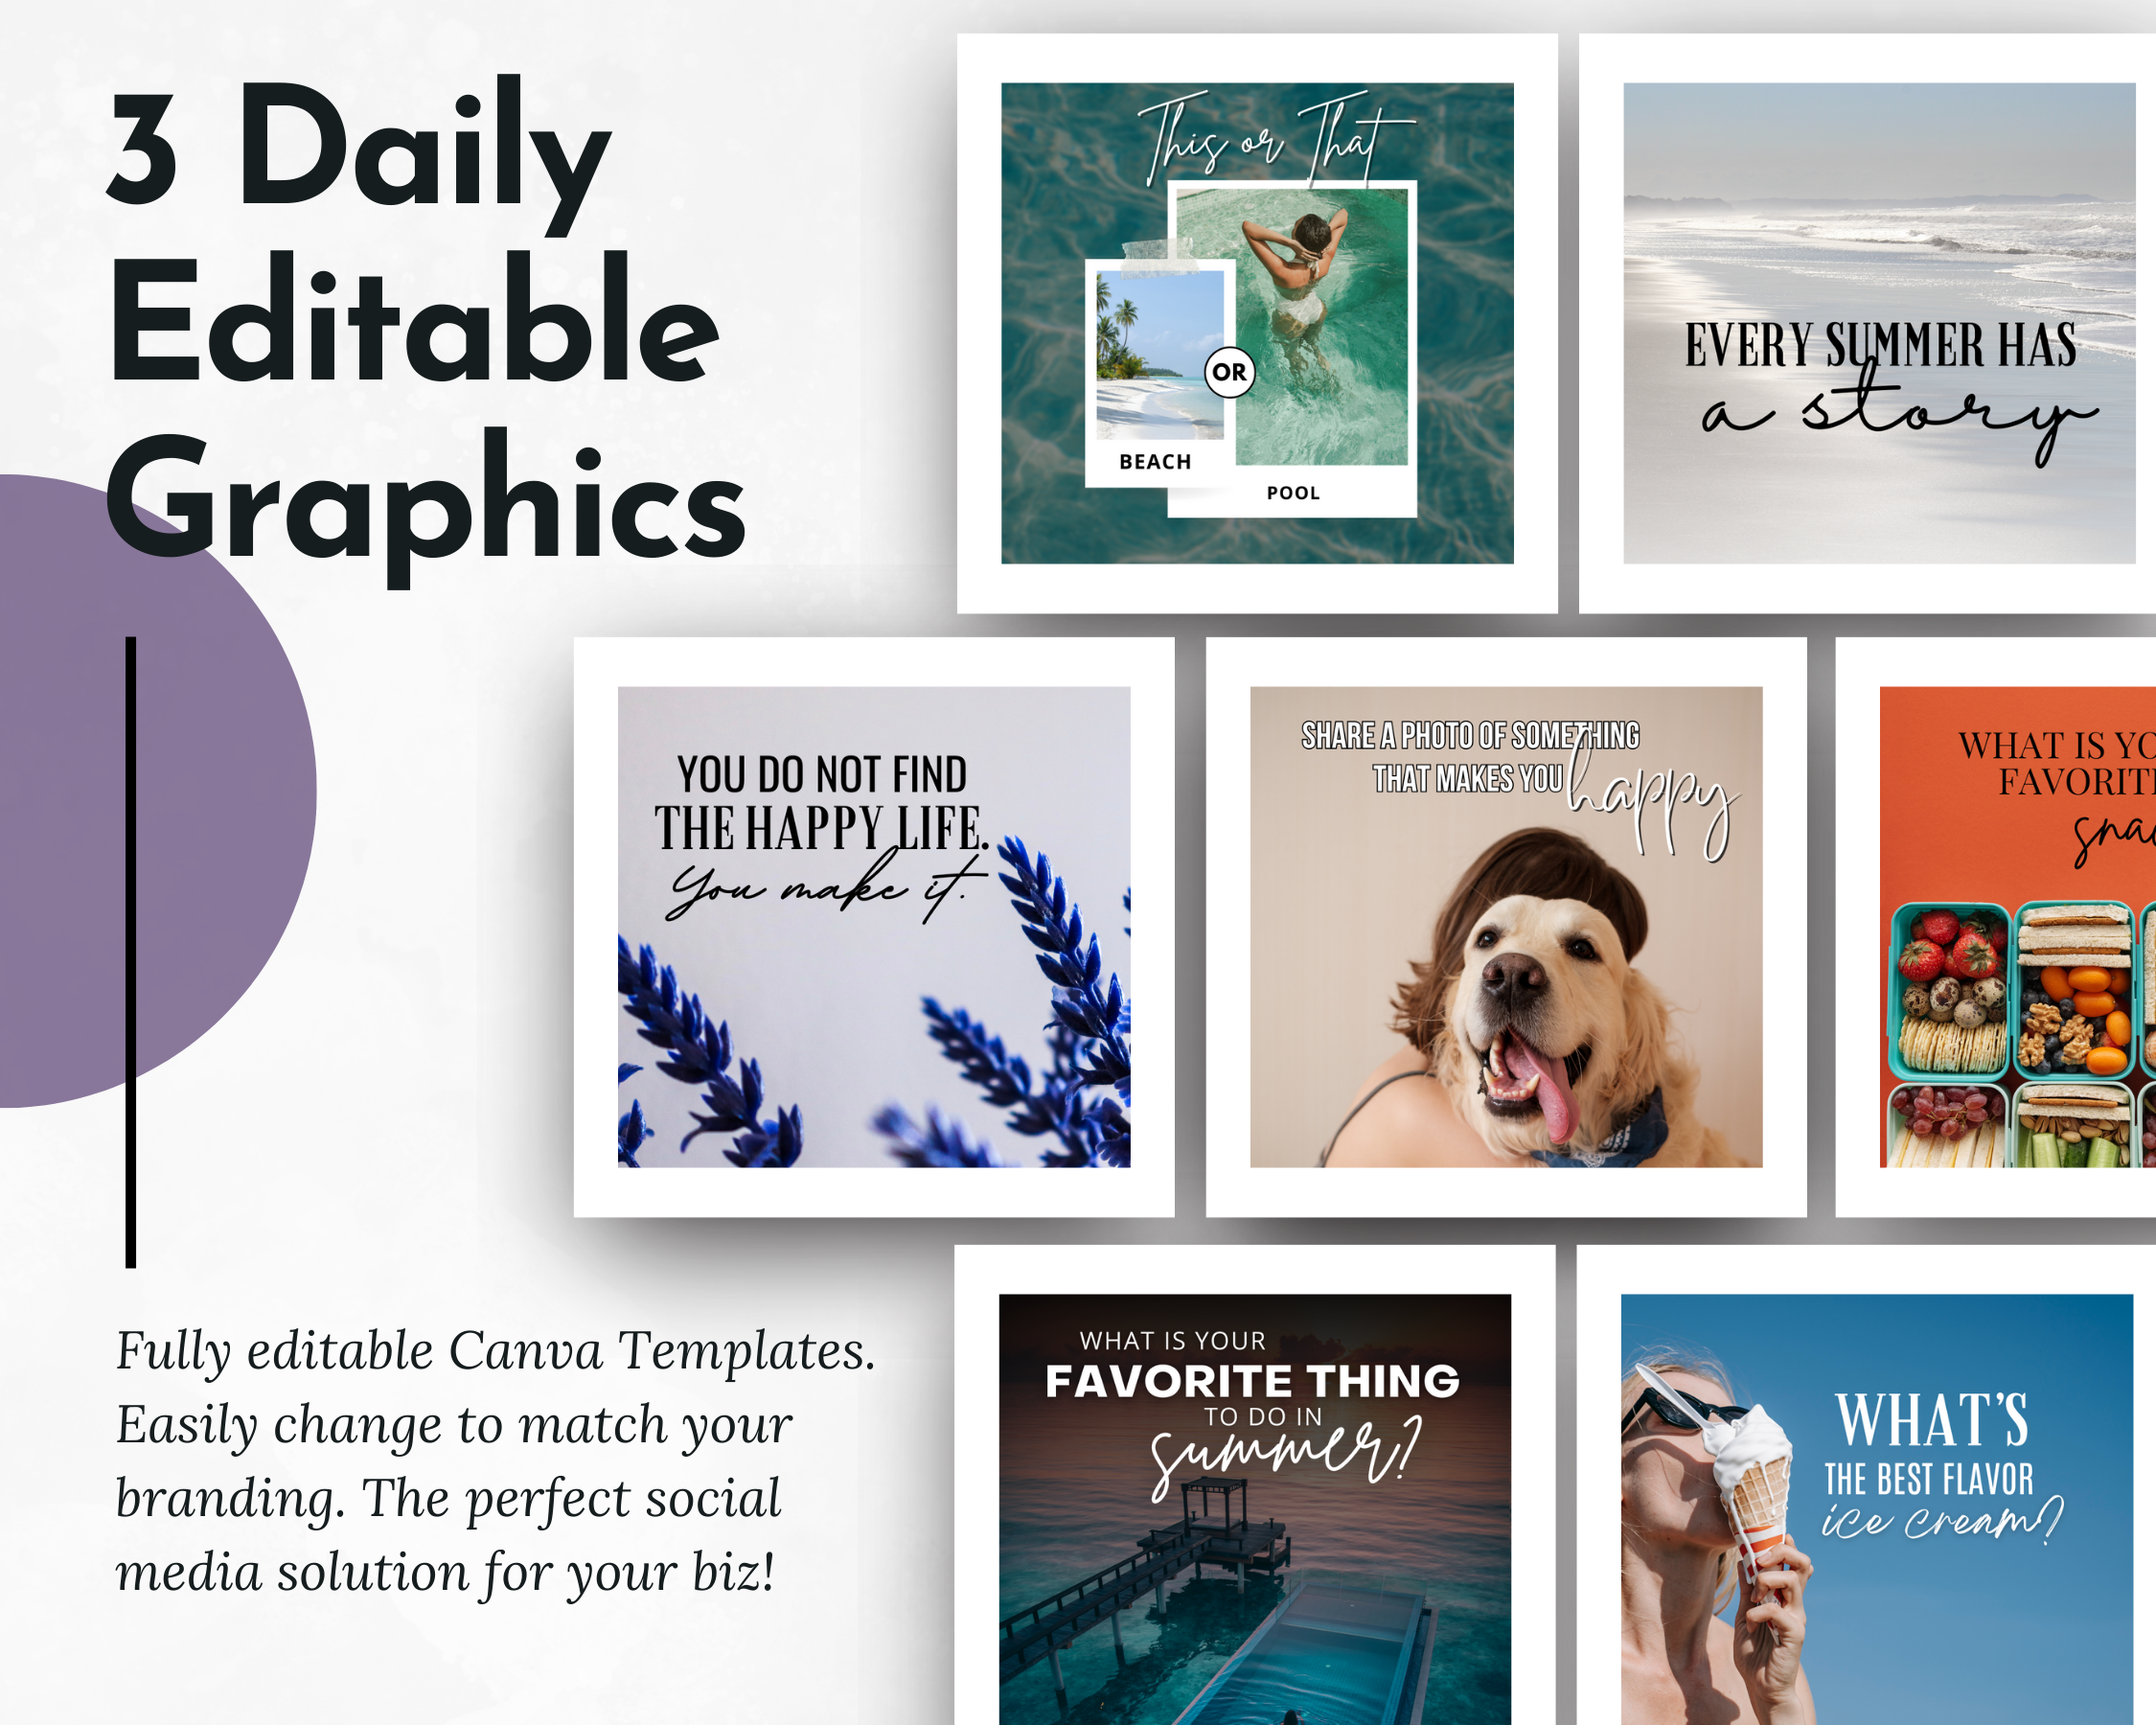 A promotional image showcasing a collection of nine customizable Canva templates featuring various themes including nature, pets, and summer quotes, ideal for a Your Social Plan on social media. Created by Get Socially Inclined.